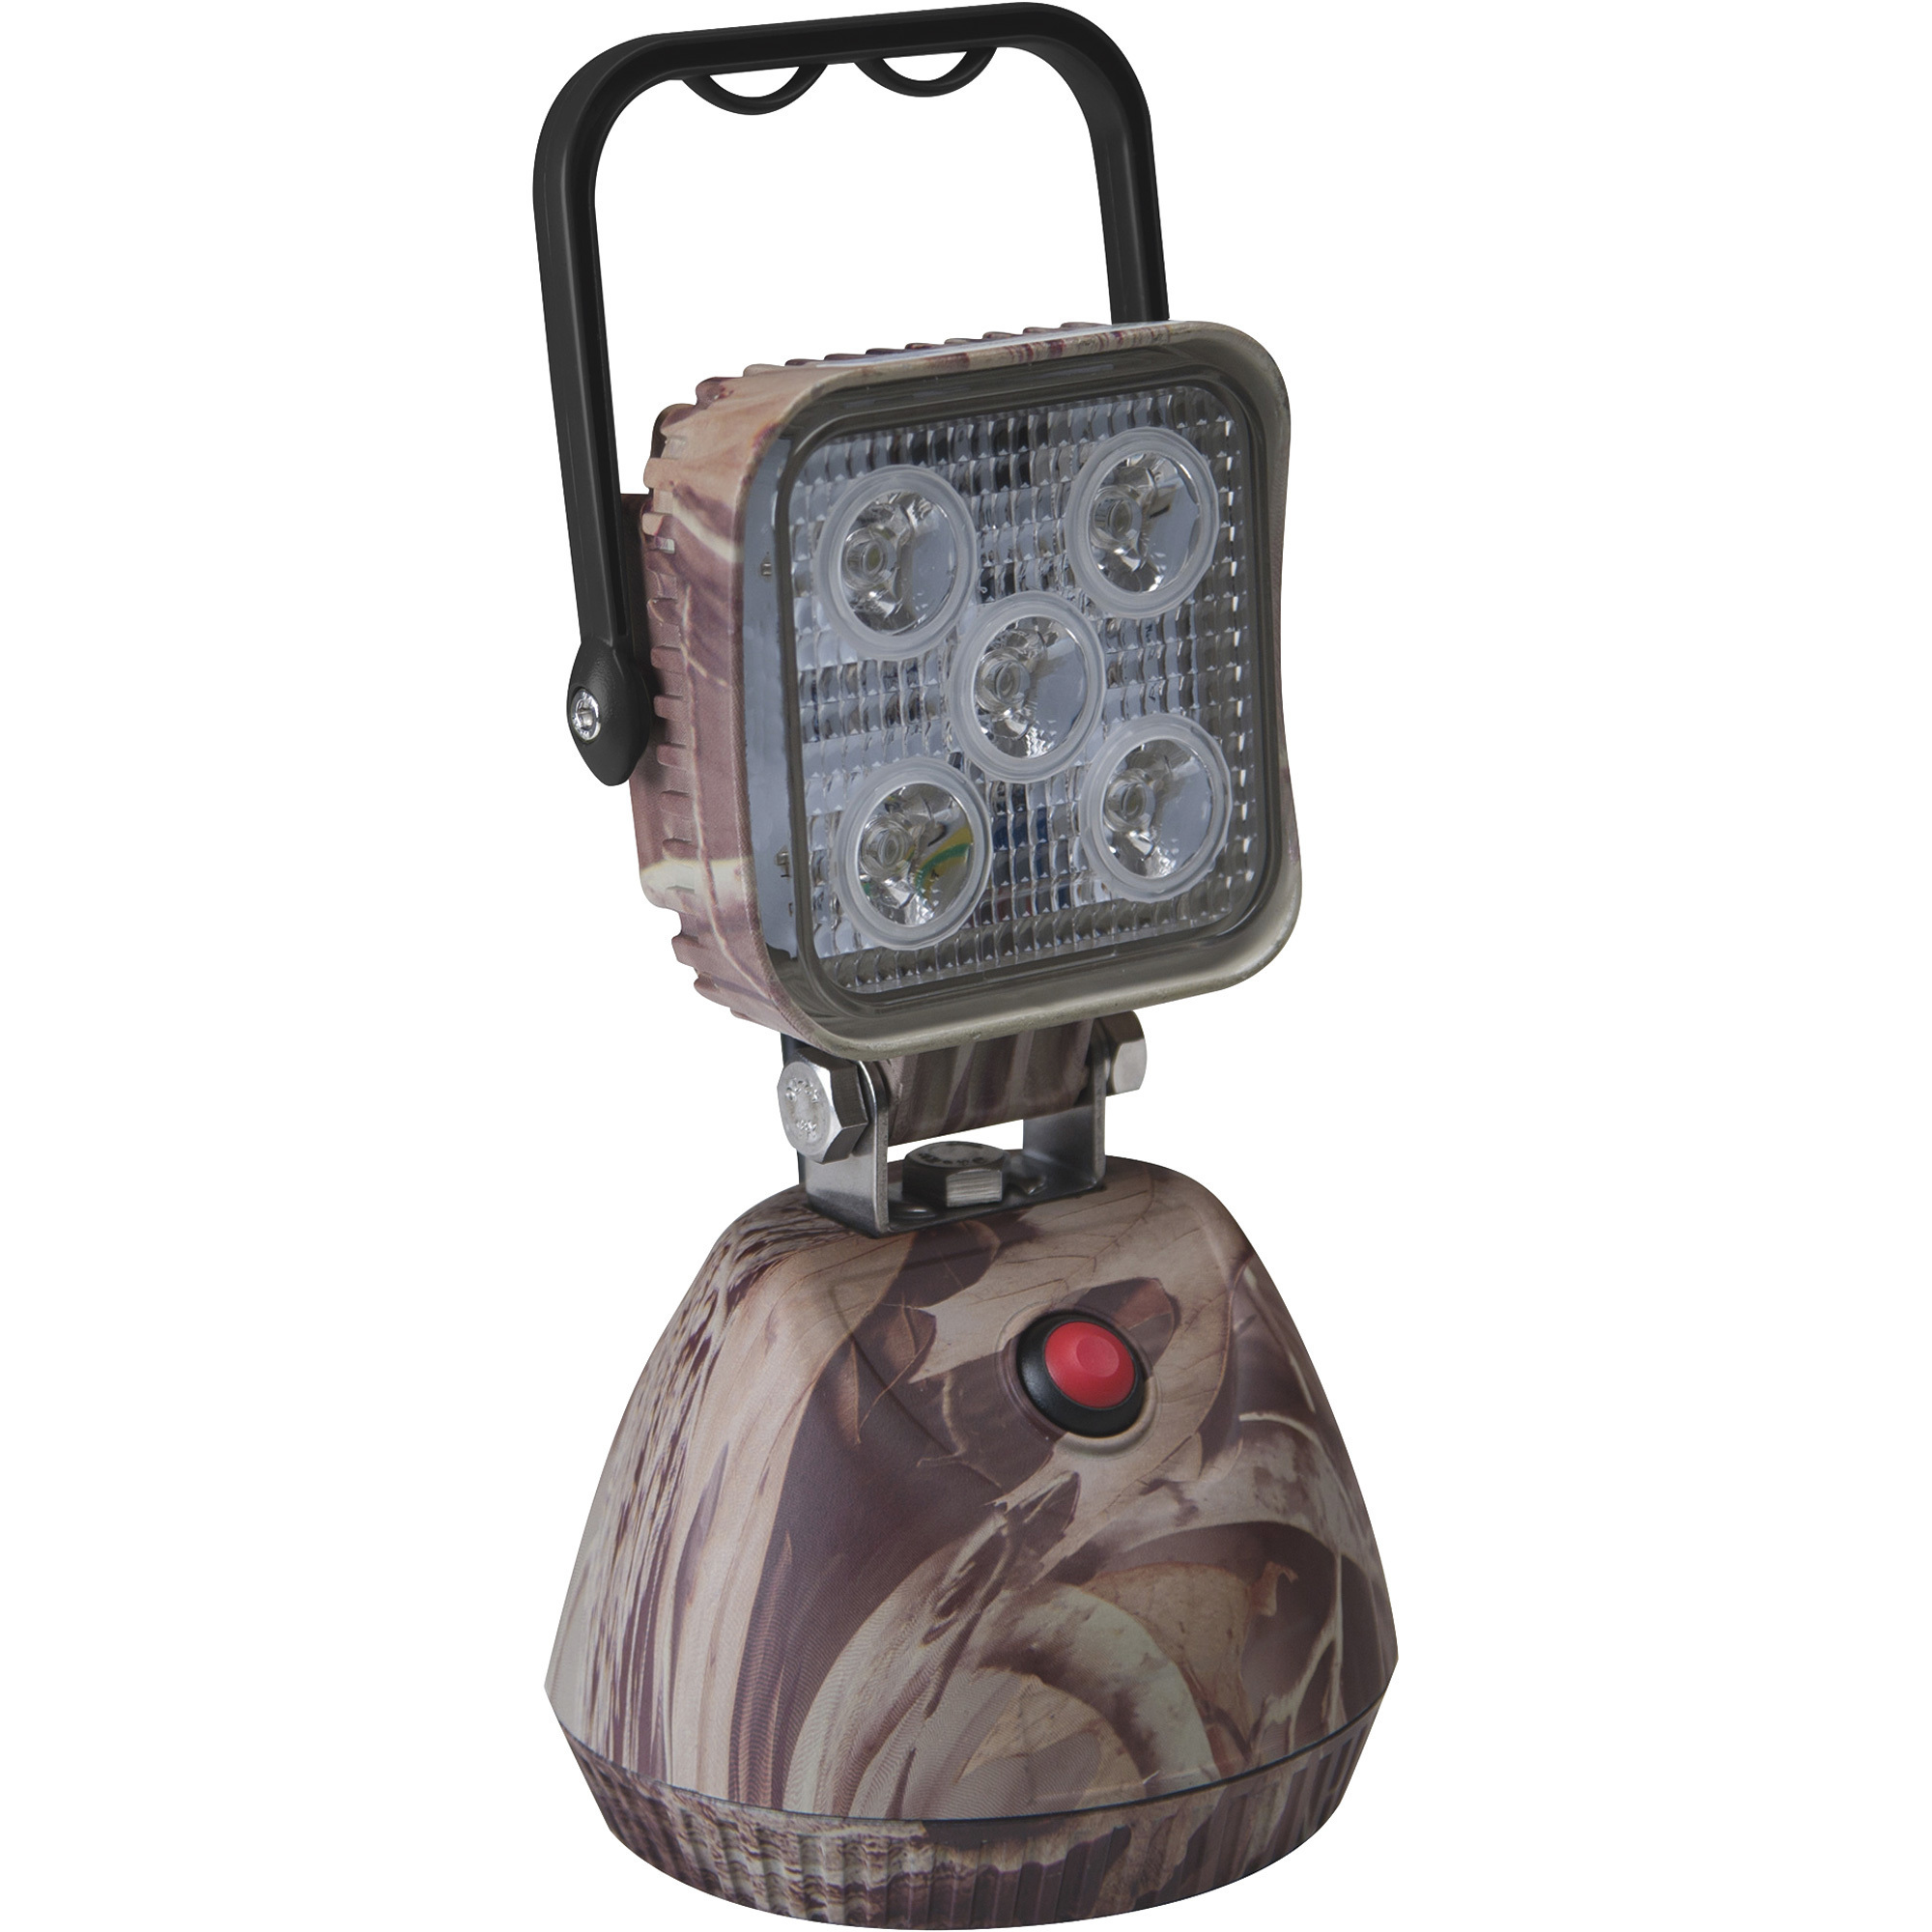 LED Rechargeable Work Light — 12V, 650 Lumens, 5 LEDs, Camouflage Pattern, Model - ECCO EW2461-CAMO